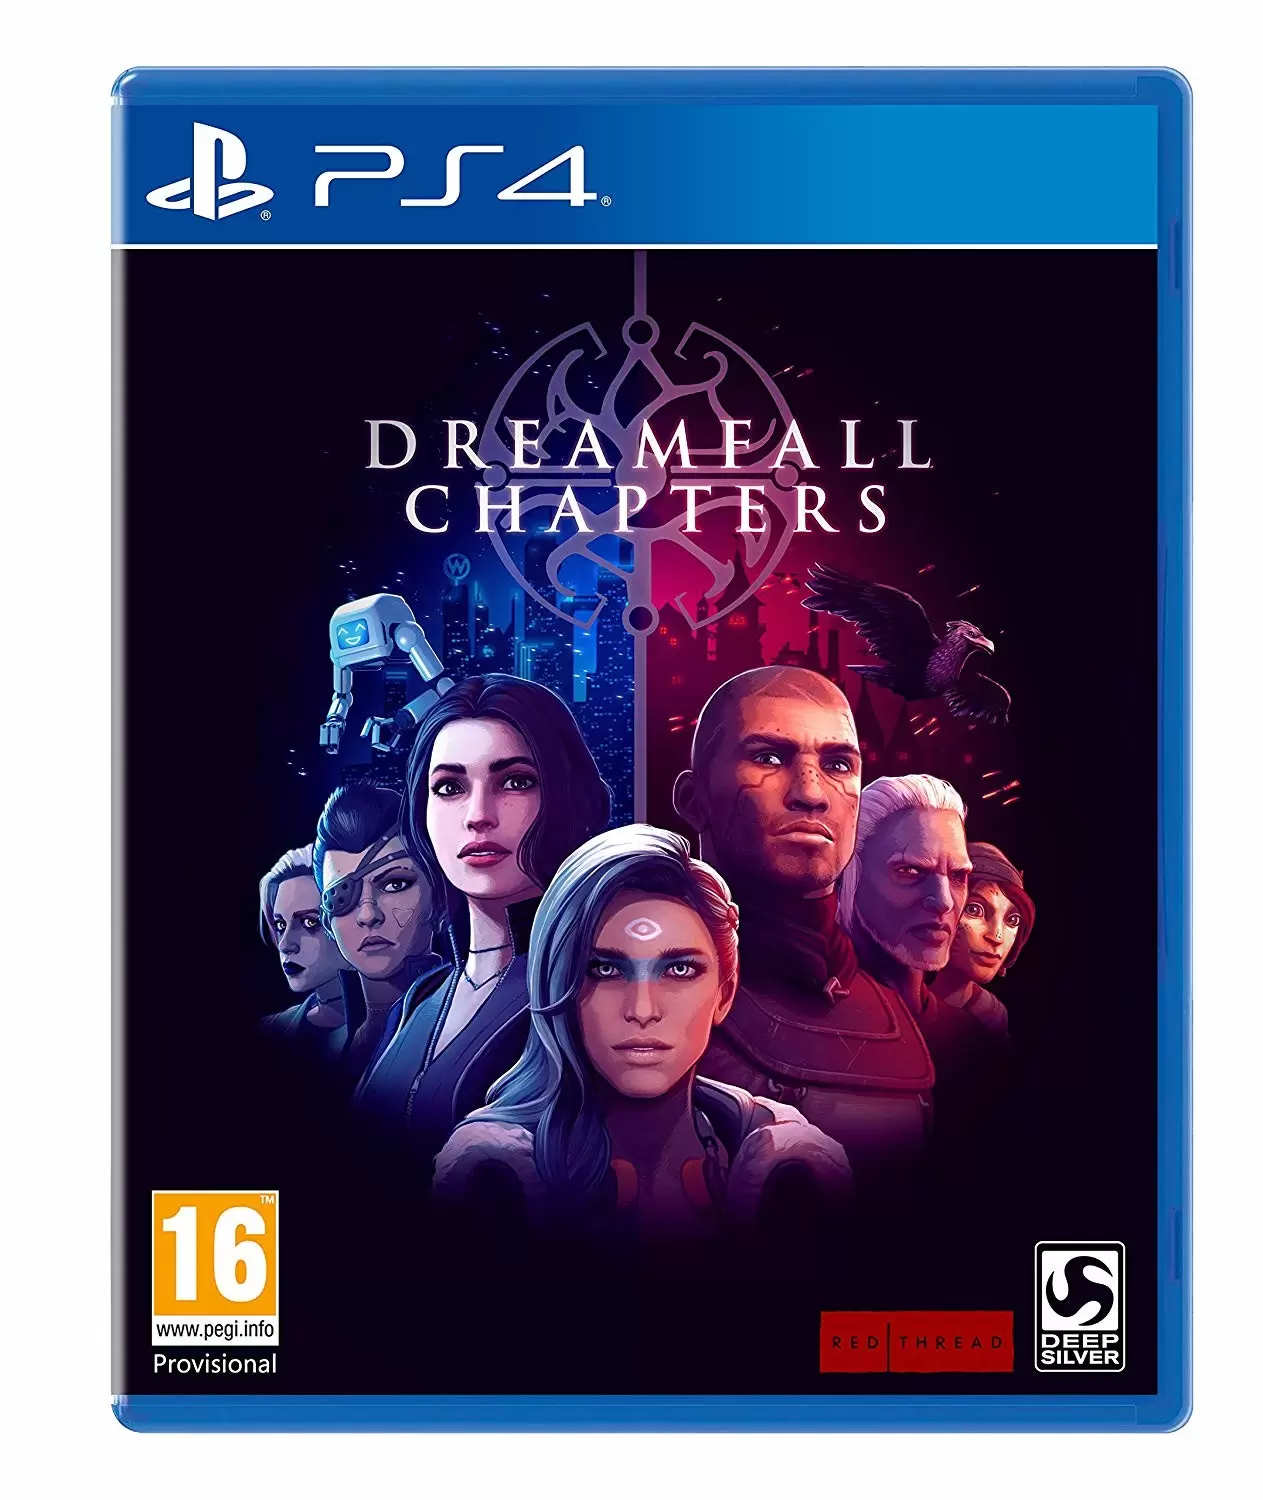 PS4 Games - Dreamfall Chapters